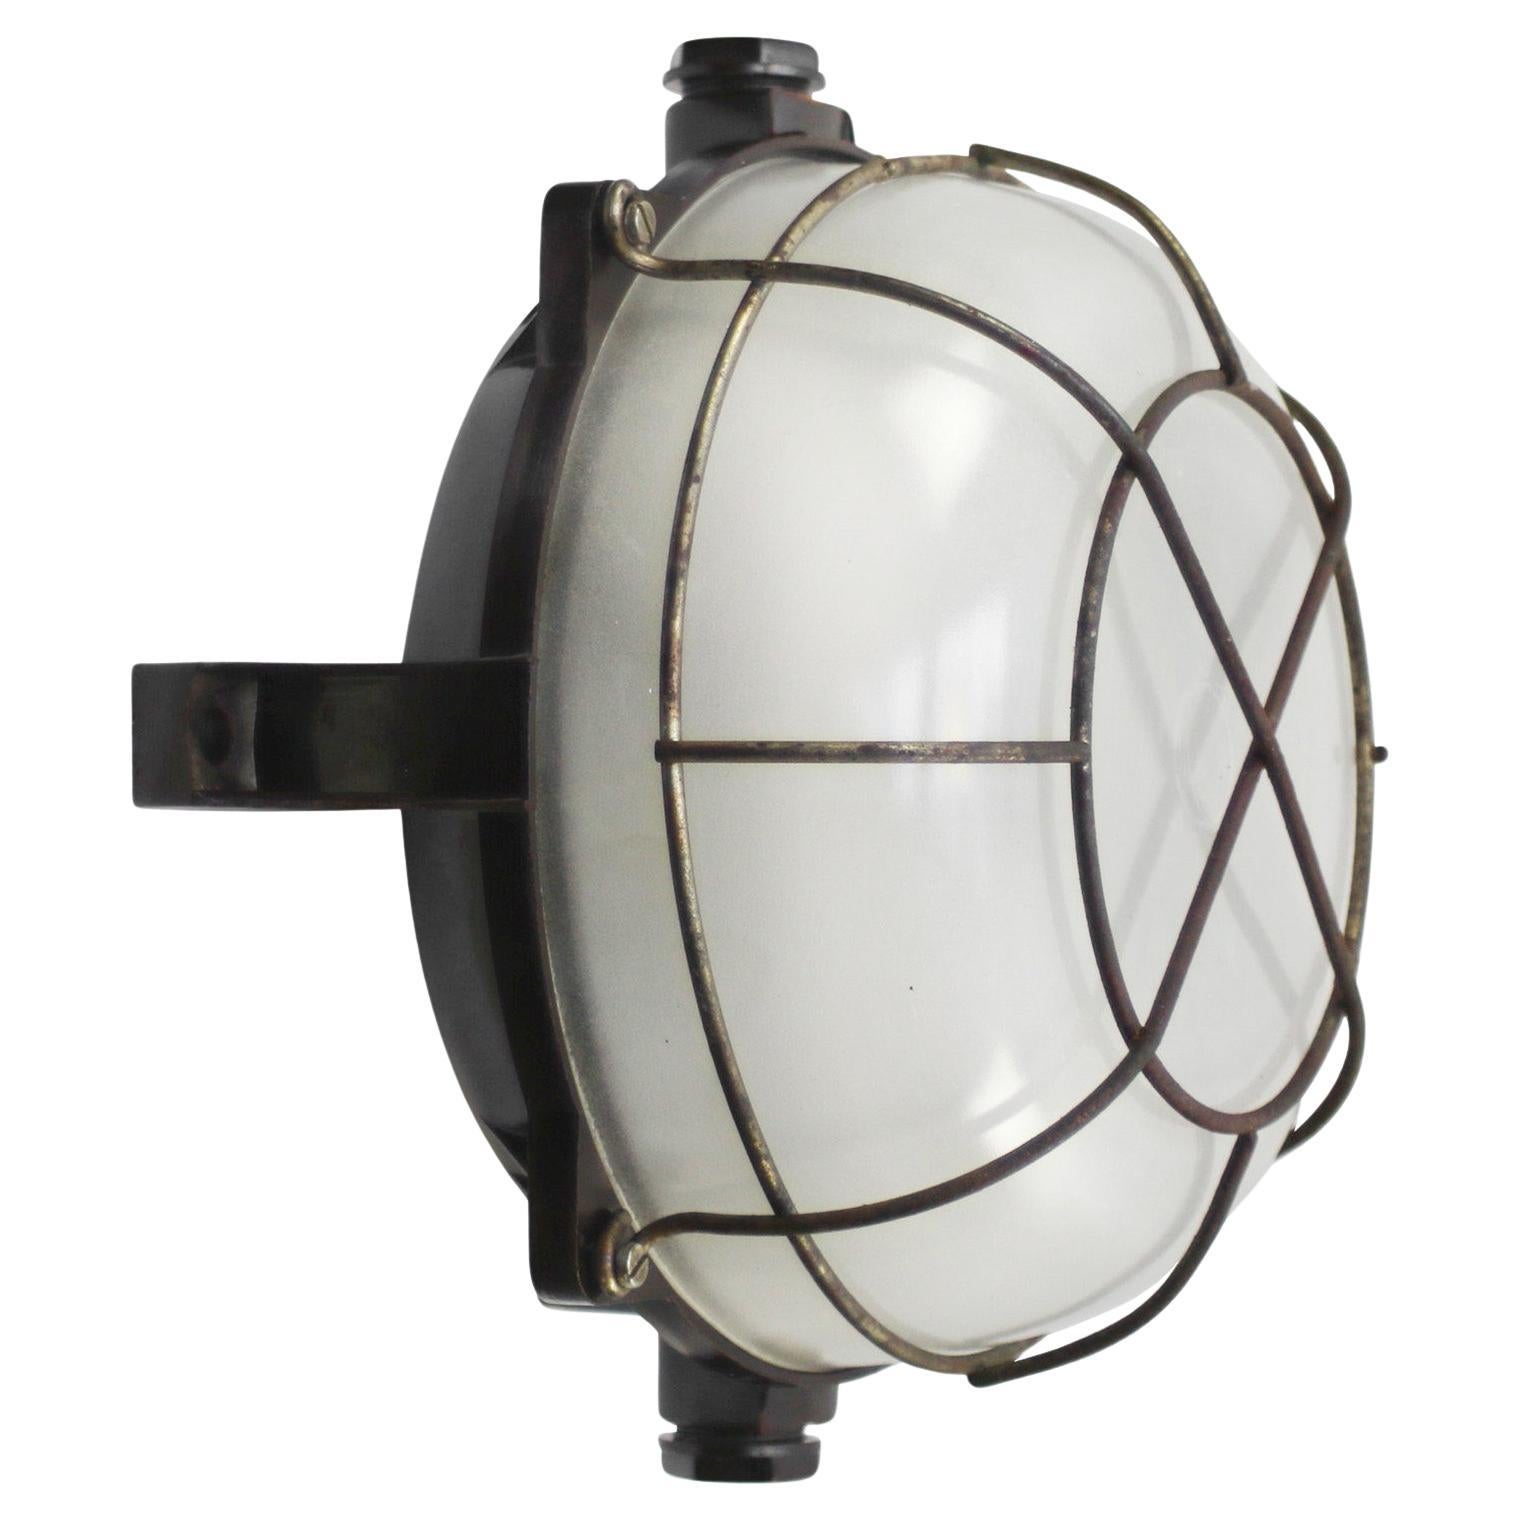 Industrial wall and ceiling scone
Bakelite back, milk frosted glass
metal cage

Weight: 2.20 kg / 4.9 lb

Priced per individual item. All lamps have been made suitable by international standards for incandescent light bulbs, energy-efficient and LED